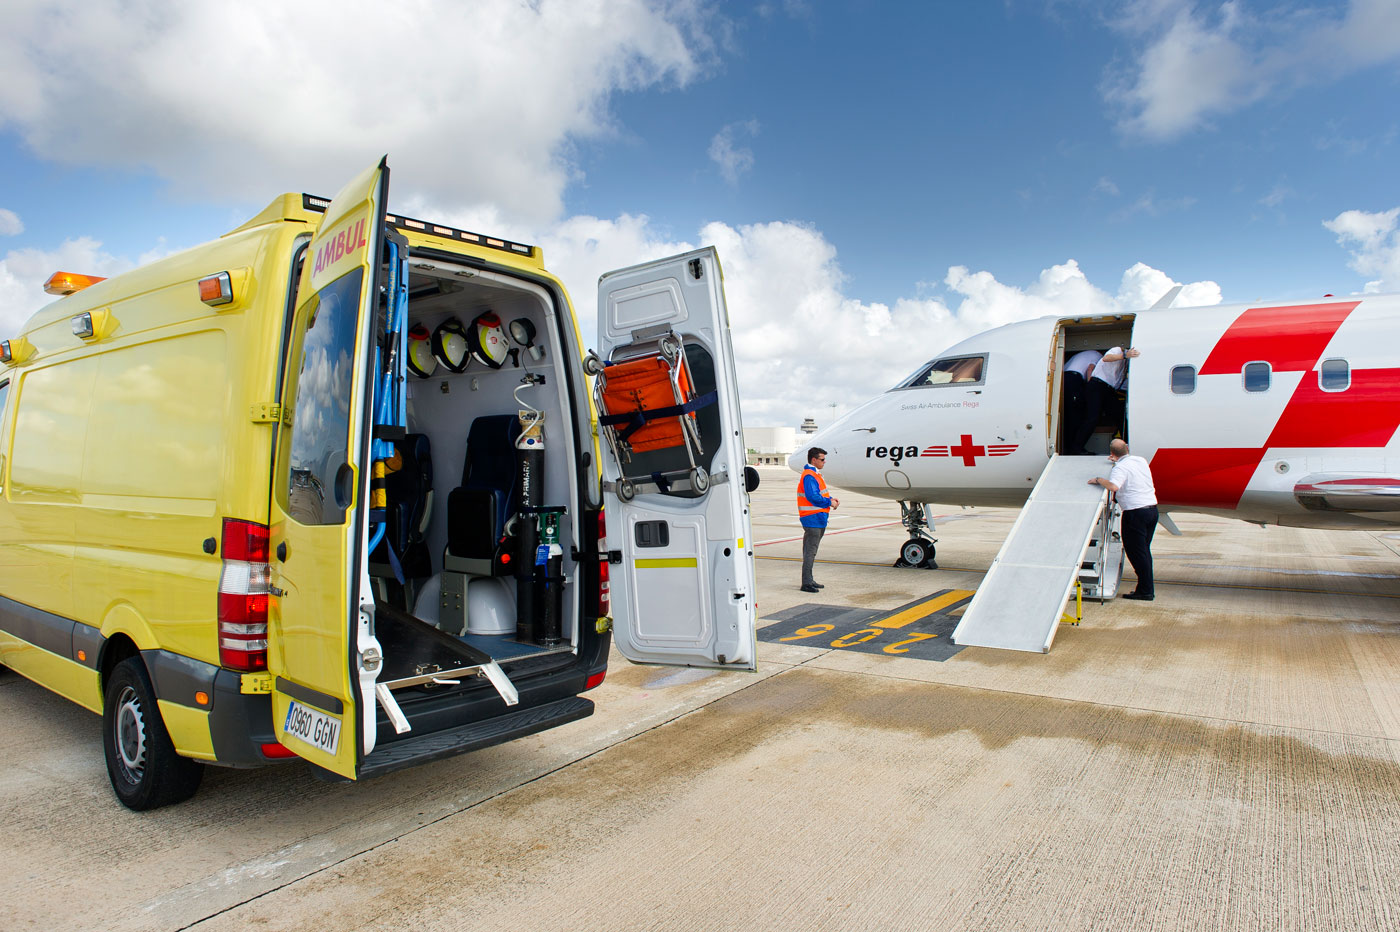 The ground ambulance transports the patient to the waiting aircraft, Palma de Mallorca, Spain, 2012